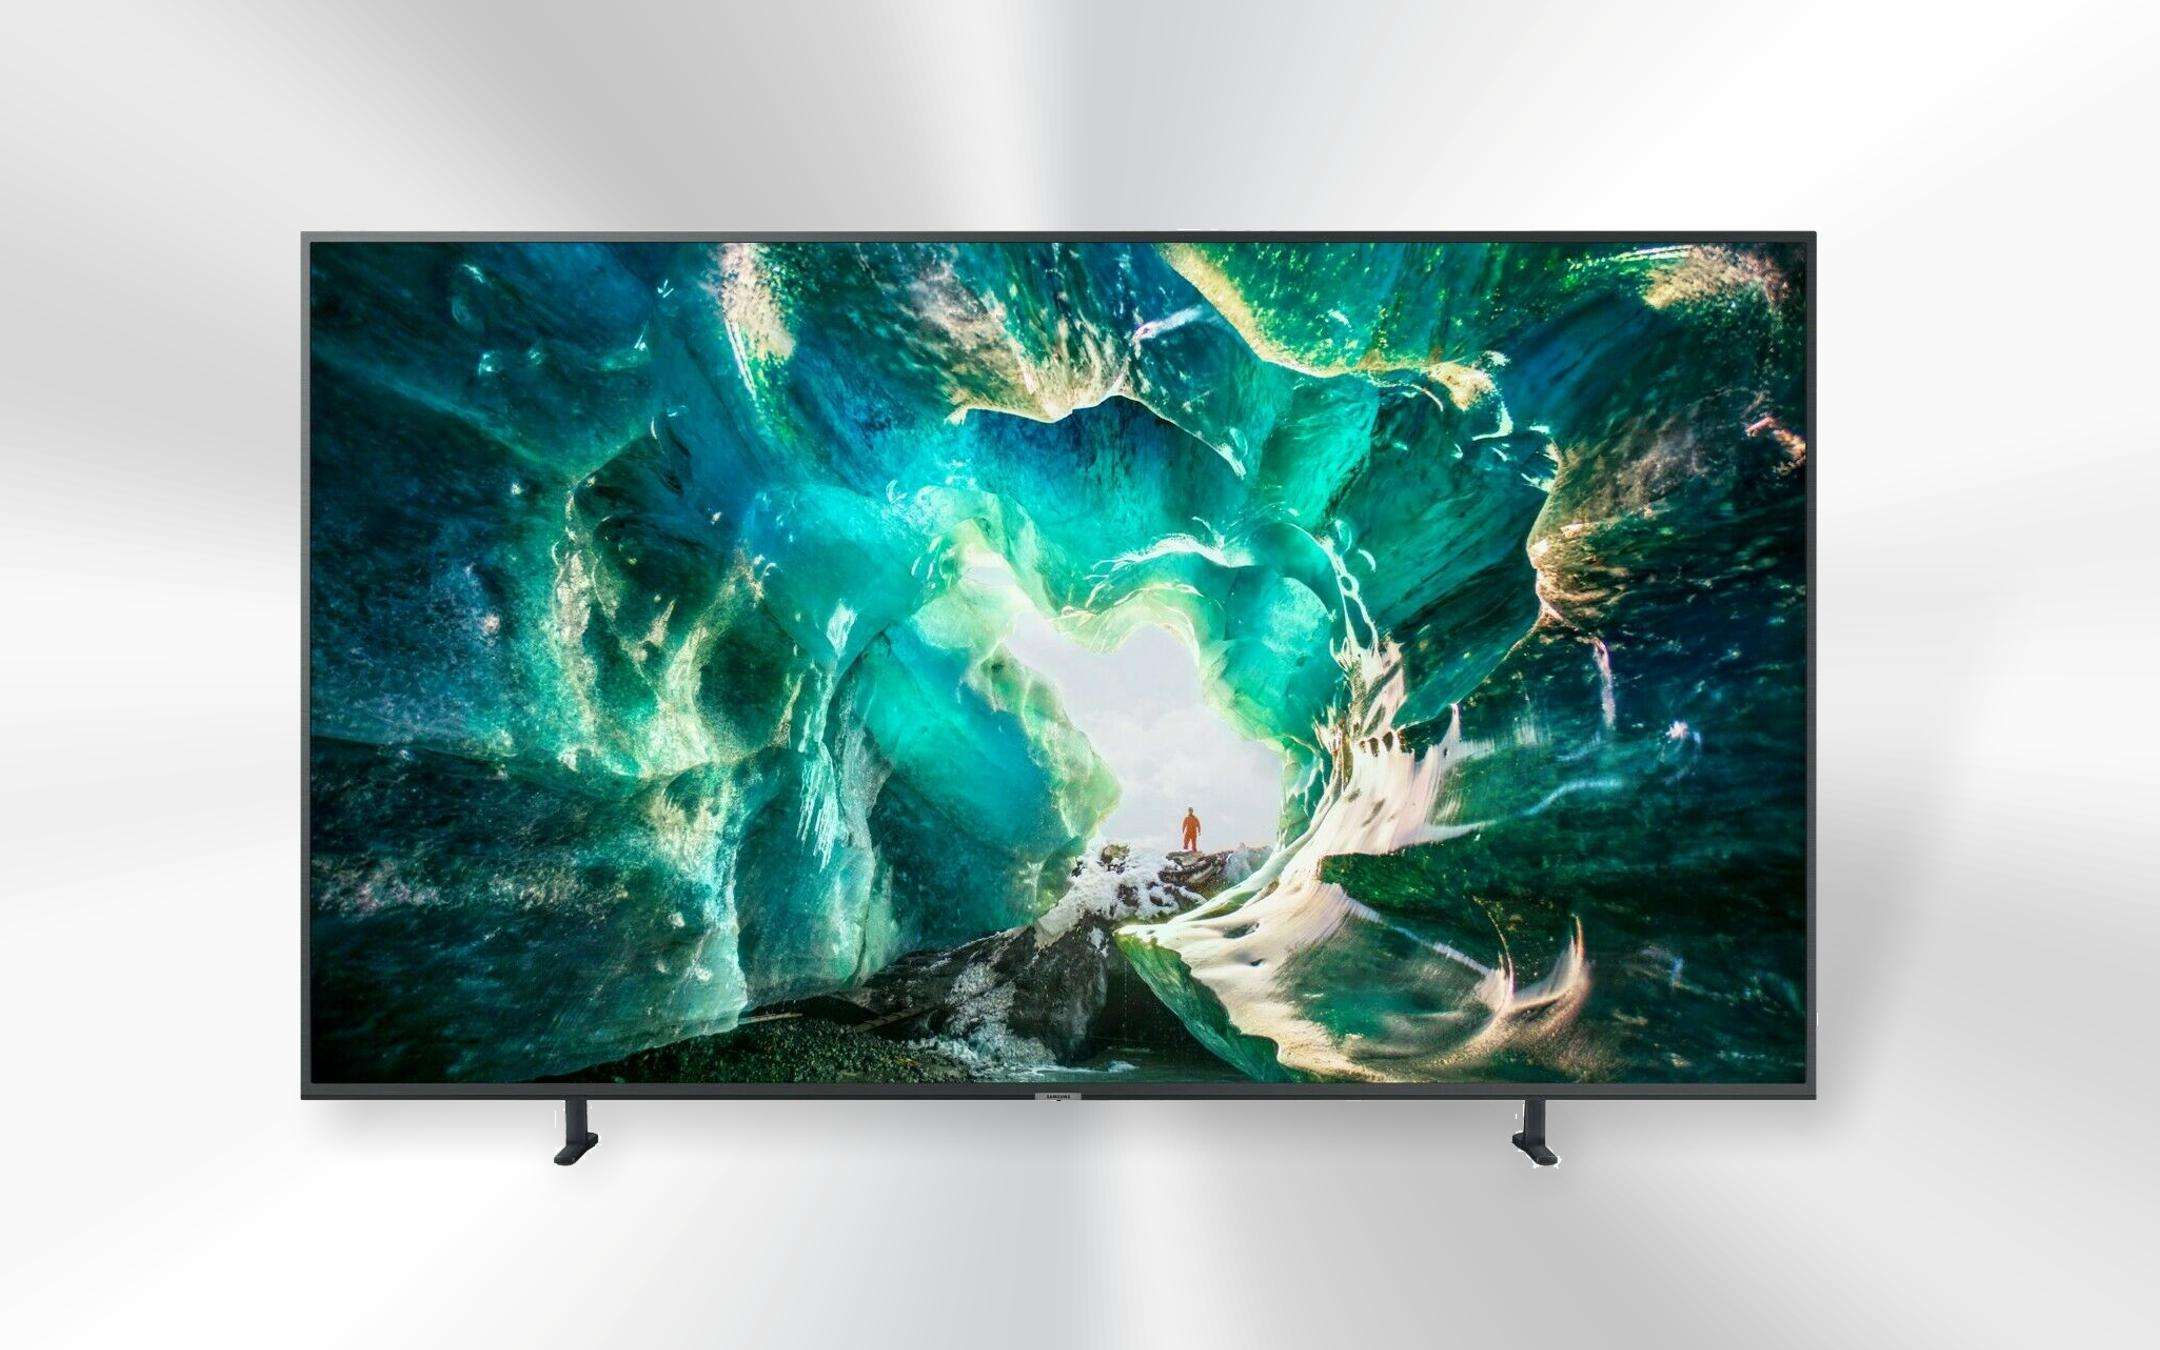 82 inches screen, 44% discount